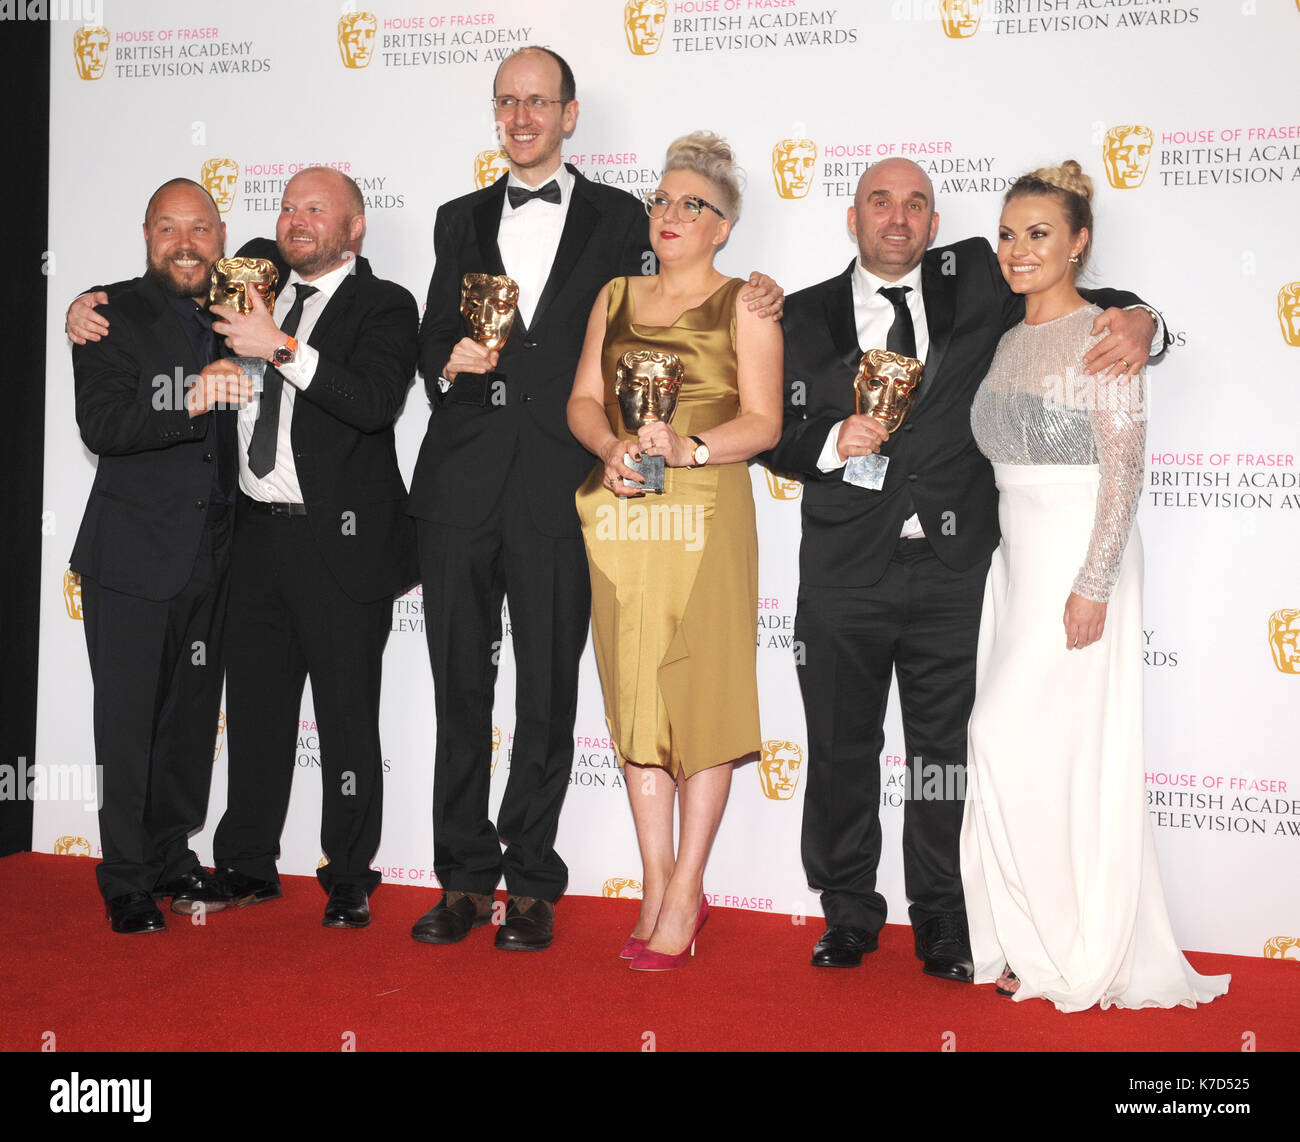 Photo Must Be Credited ©Kate Green/Alpha Press 079965 08/05/2016 Best Mini Series, This Is England 90, Stephen Graham, Shane Meadows, Mark Herbert, Jack Thorne, Rebekah Wray-Rogers, Chanel Cresswell at the House of Fraser British Academy Television Awards Bafta Pressroom held at the Royal Festival Hall in London Stock Photo